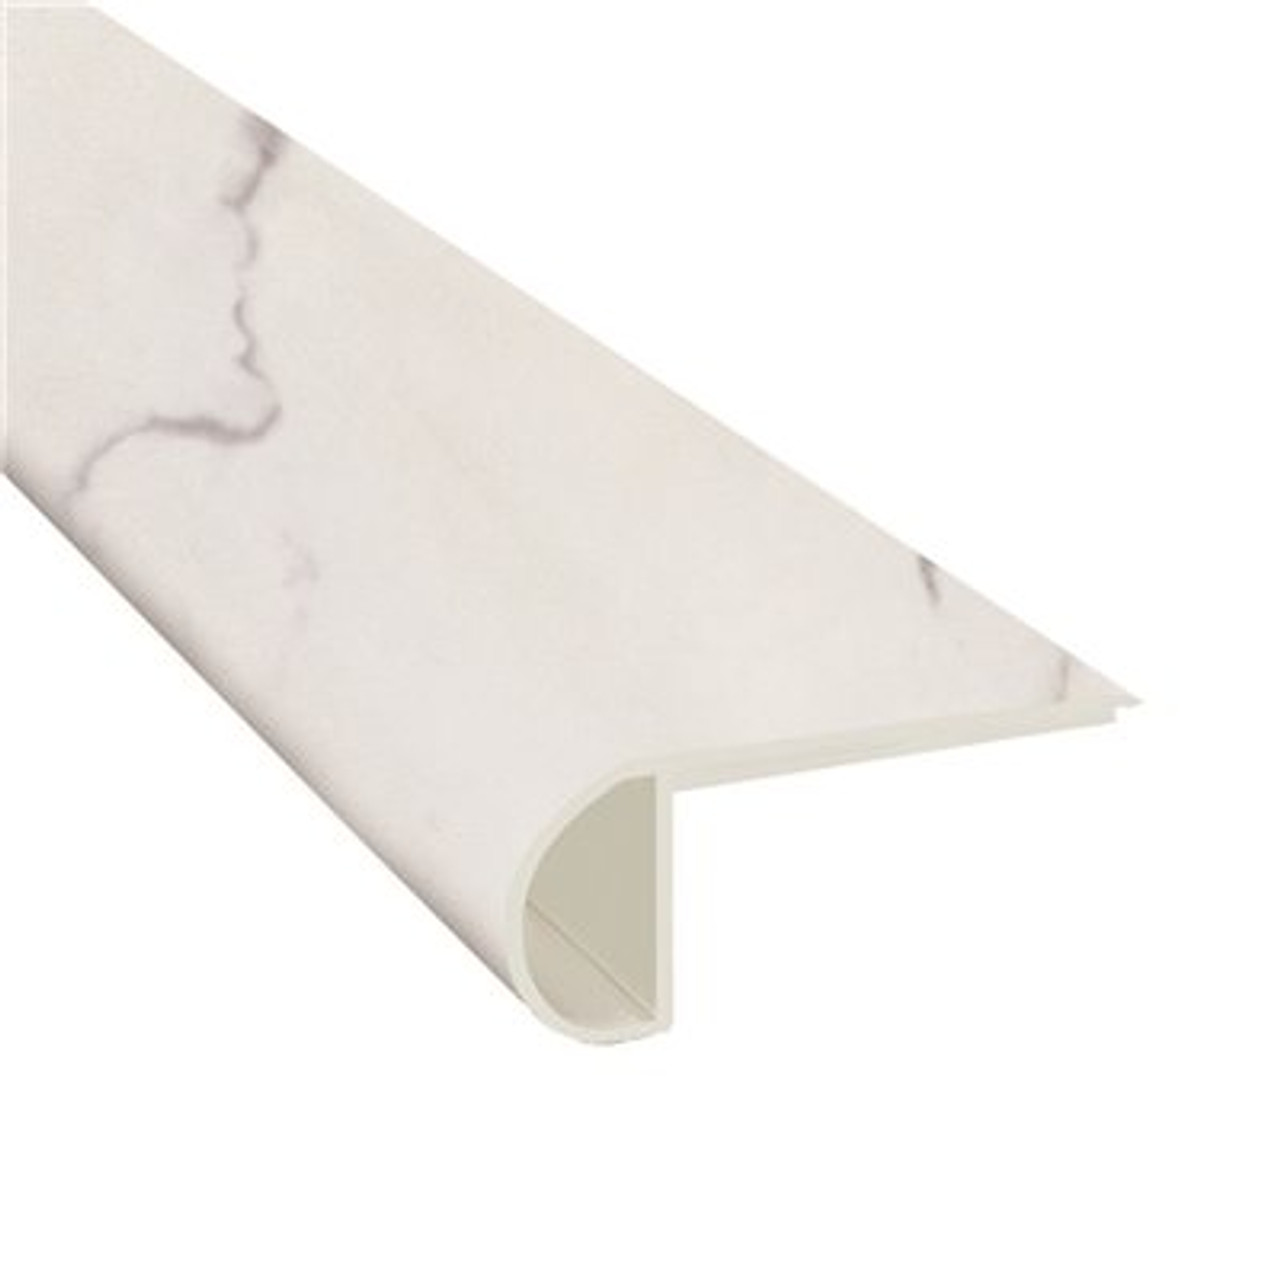 Msi Harvested Marble 3/4 In. T X 2 3/4 In. W X 94 In. L Luxury Vinyl Flush Stair Nose Molding